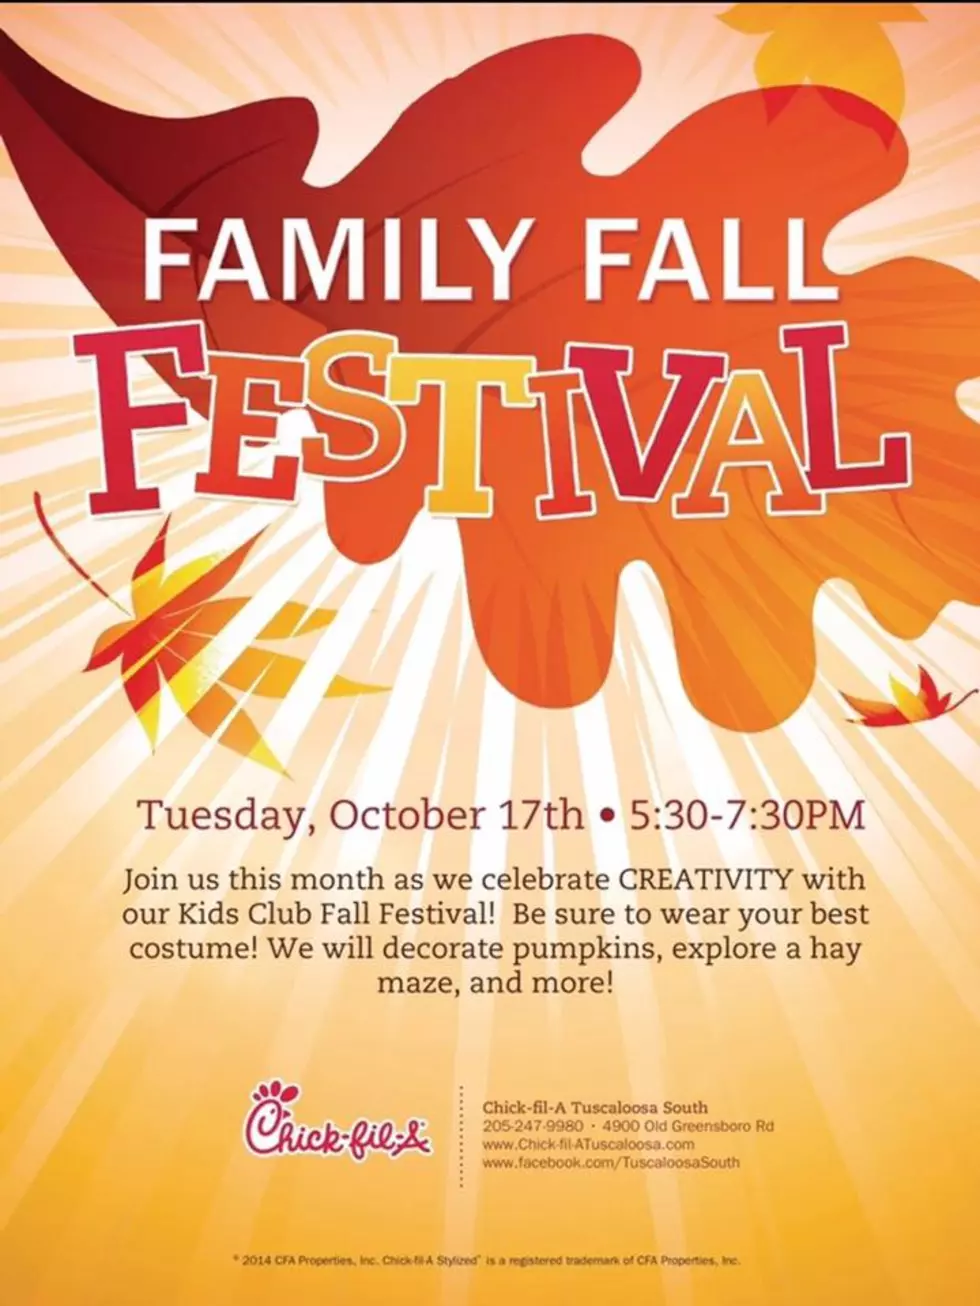 Chick-fil-A Tuscaloosa South to Host Fall Festival Tuesday, October 17, 2017